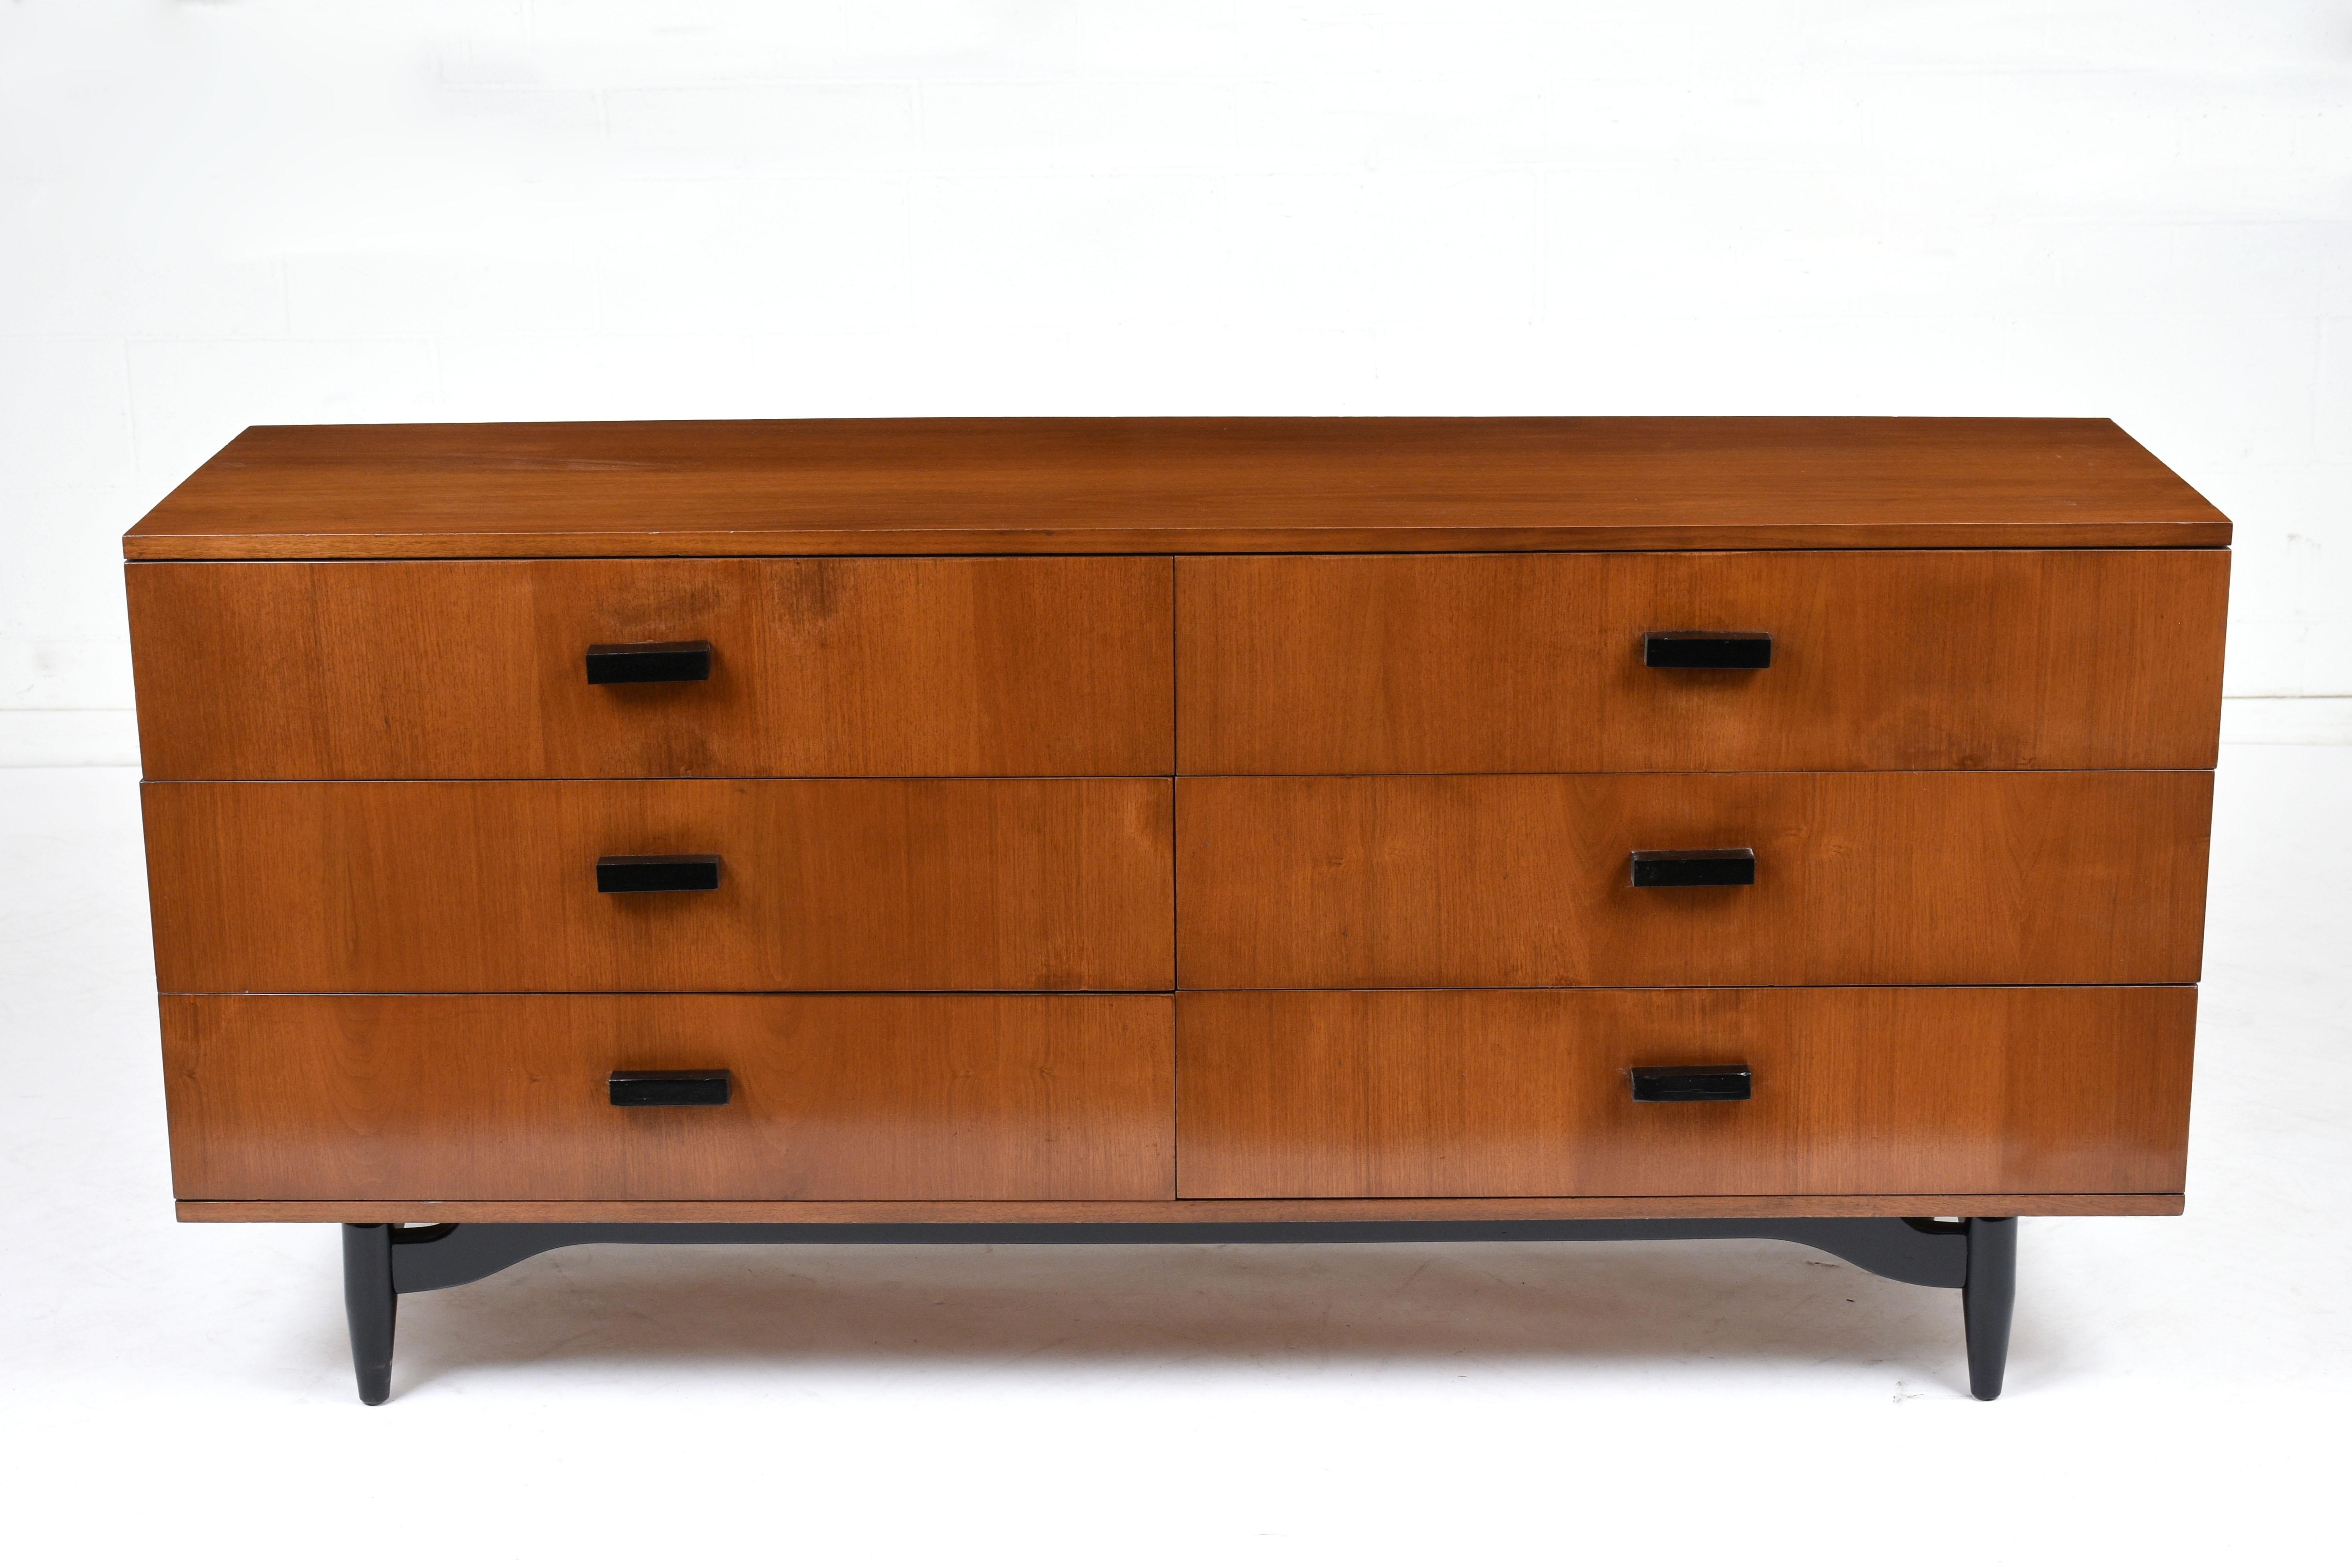 This 1960s Mid-Century Modern style chest of drawers is stained in a light walnut color and black color with a lacquered finish. This chest featured six drawers with ample storage space and carved wood handles finished in black color. The Chest is